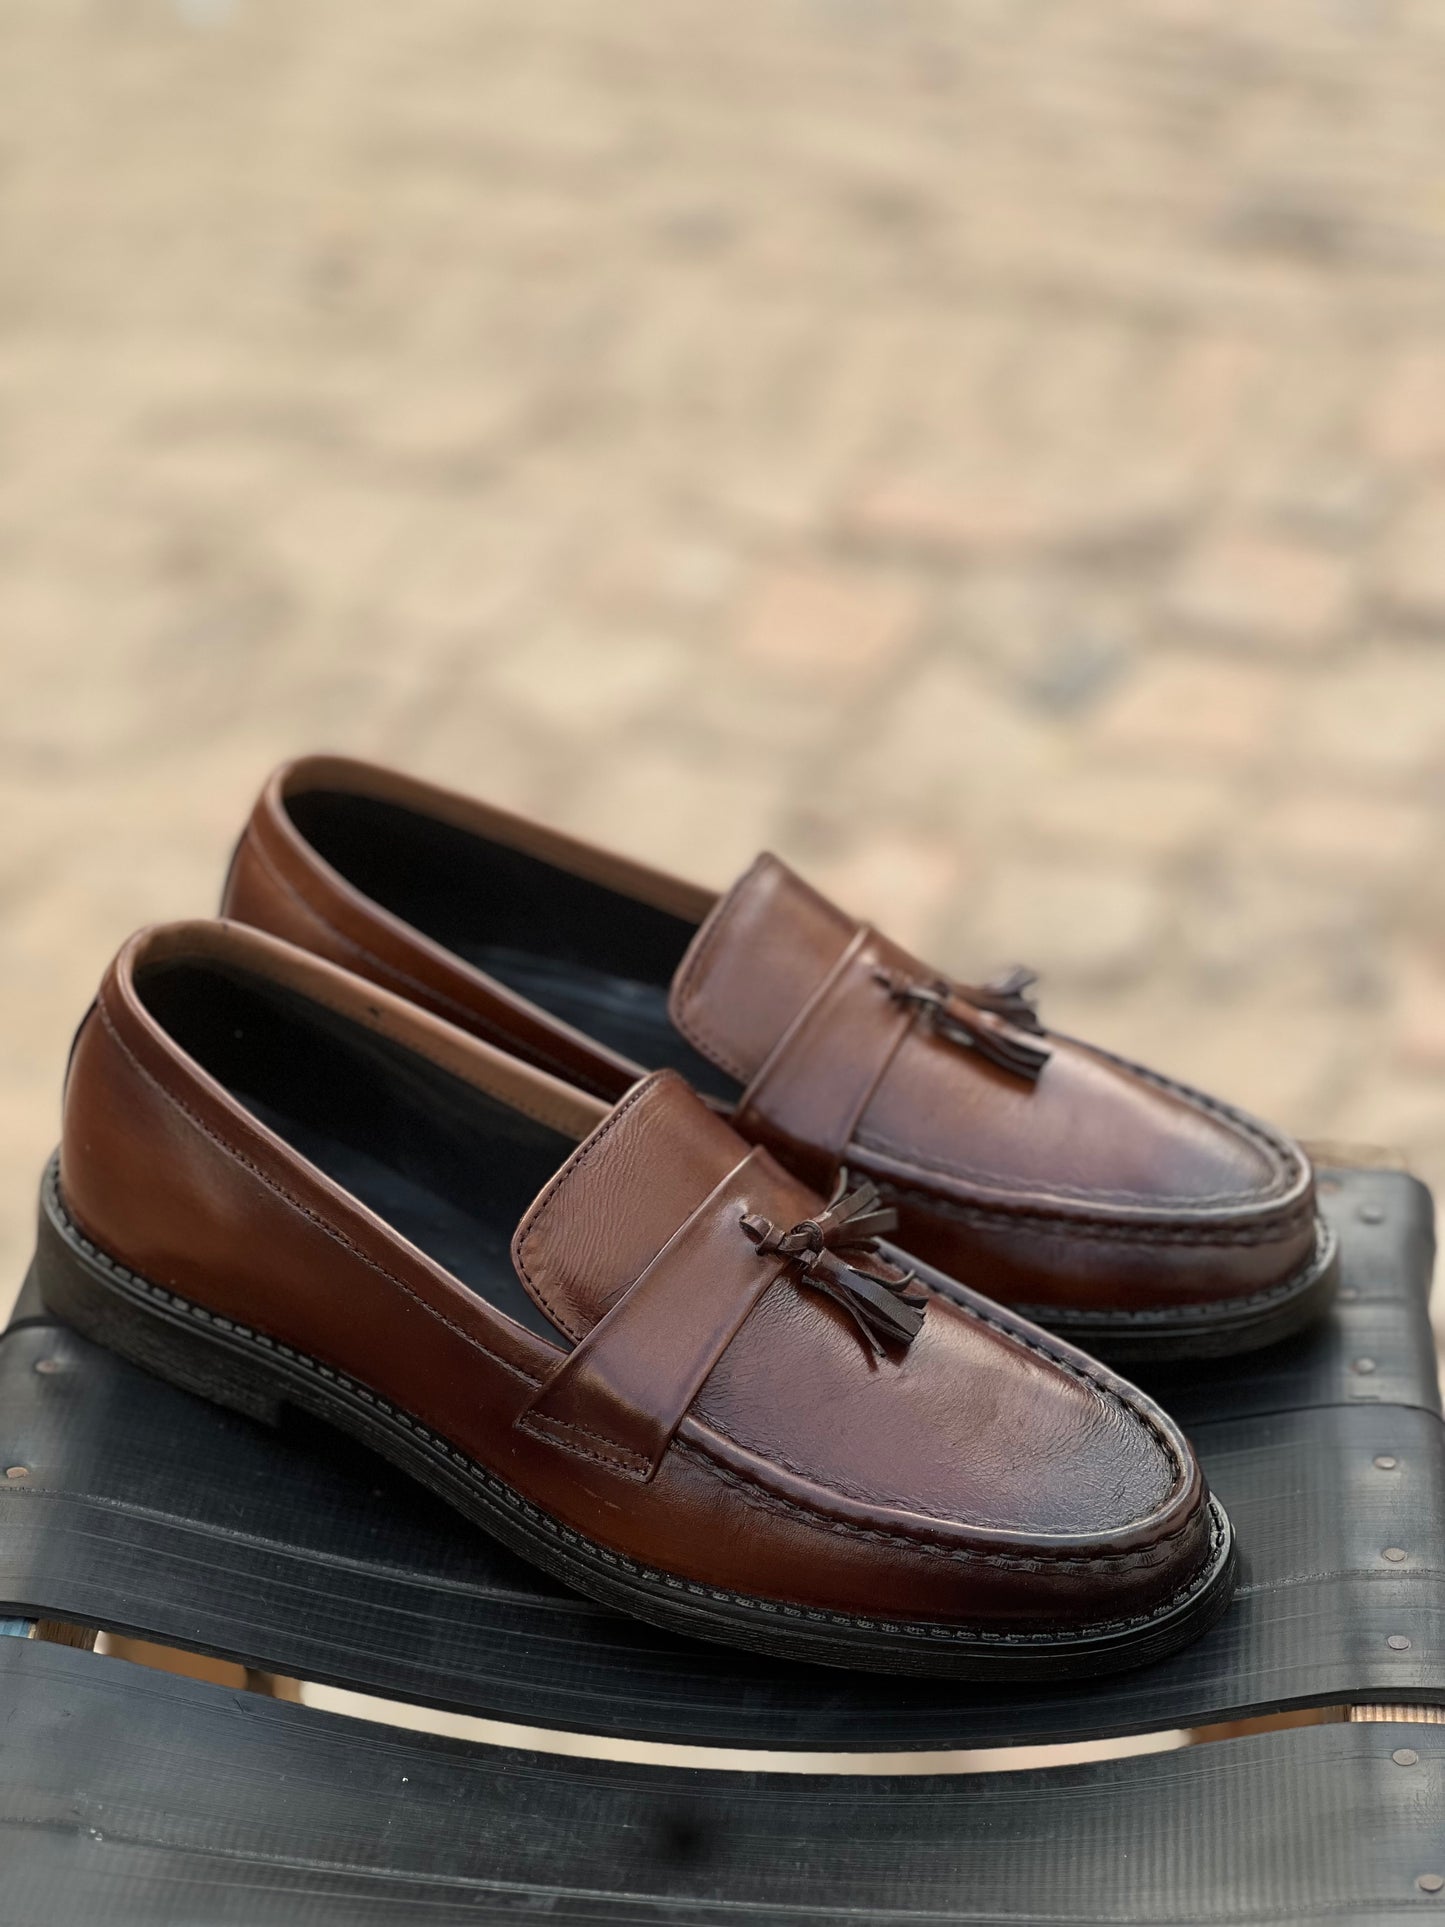 ST-10-Brown loafers with Patina finish